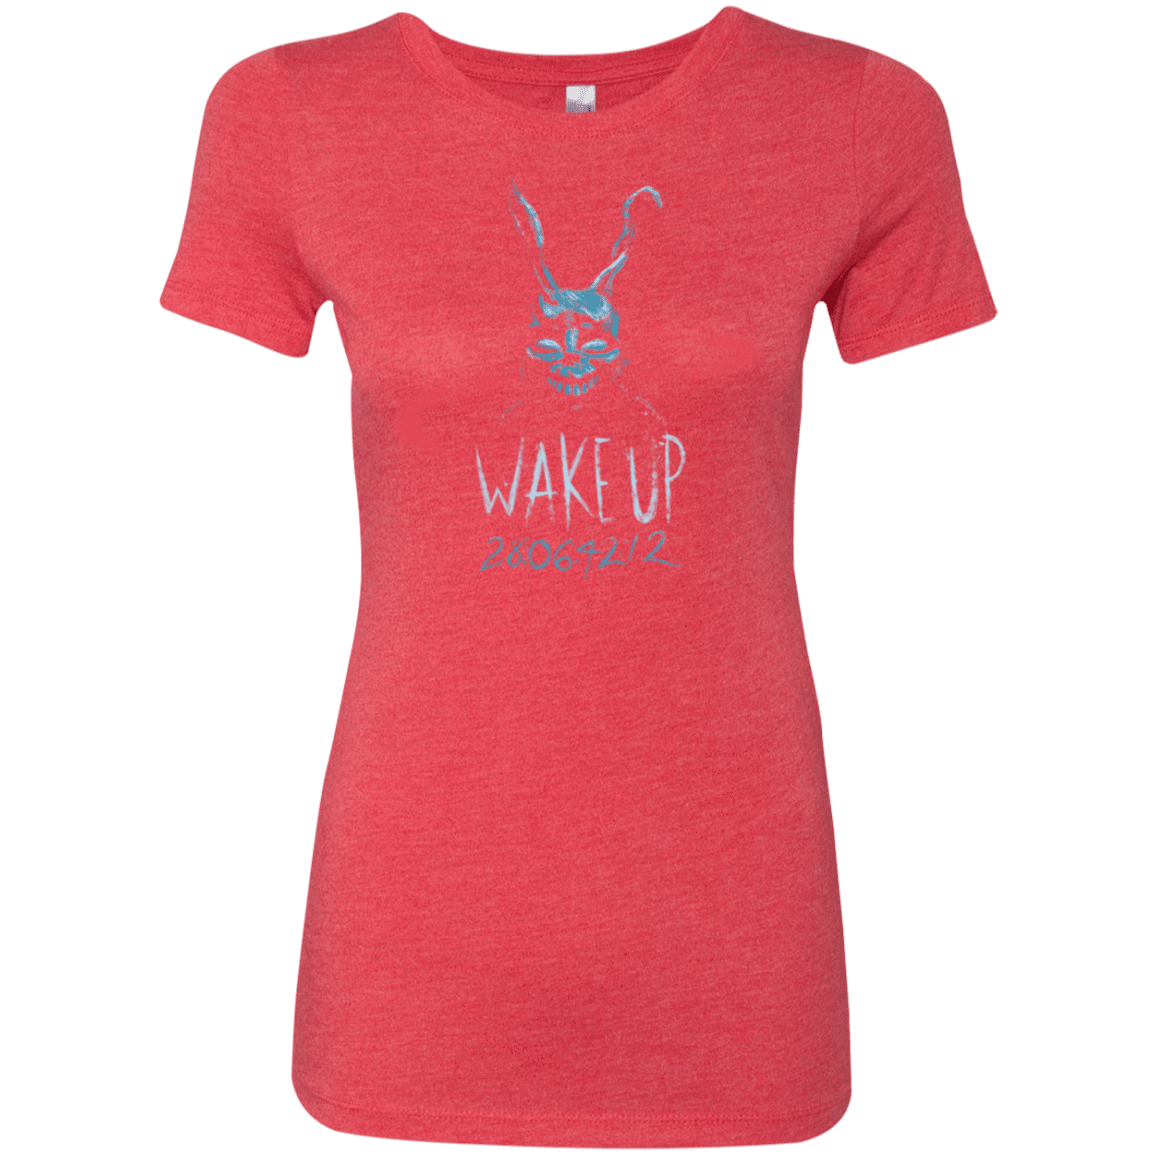 T-Shirts Vintage Red / Small Wake up 28064212 Women's Triblend T-Shirt